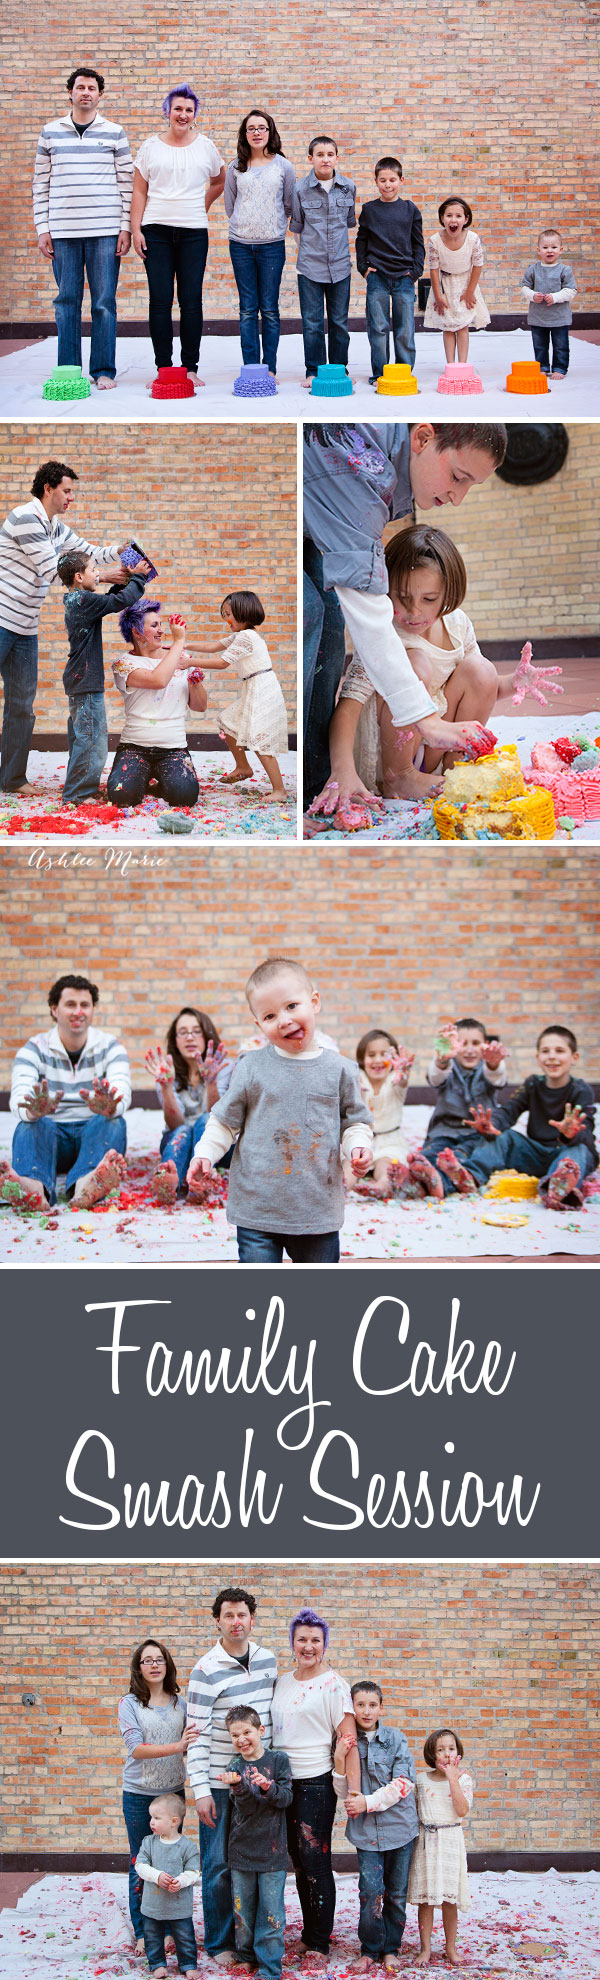 for a fun and unique family photosession we did a family smash cake session, each person got their own cake and we just went to town having and epic food fight with cake and frosting